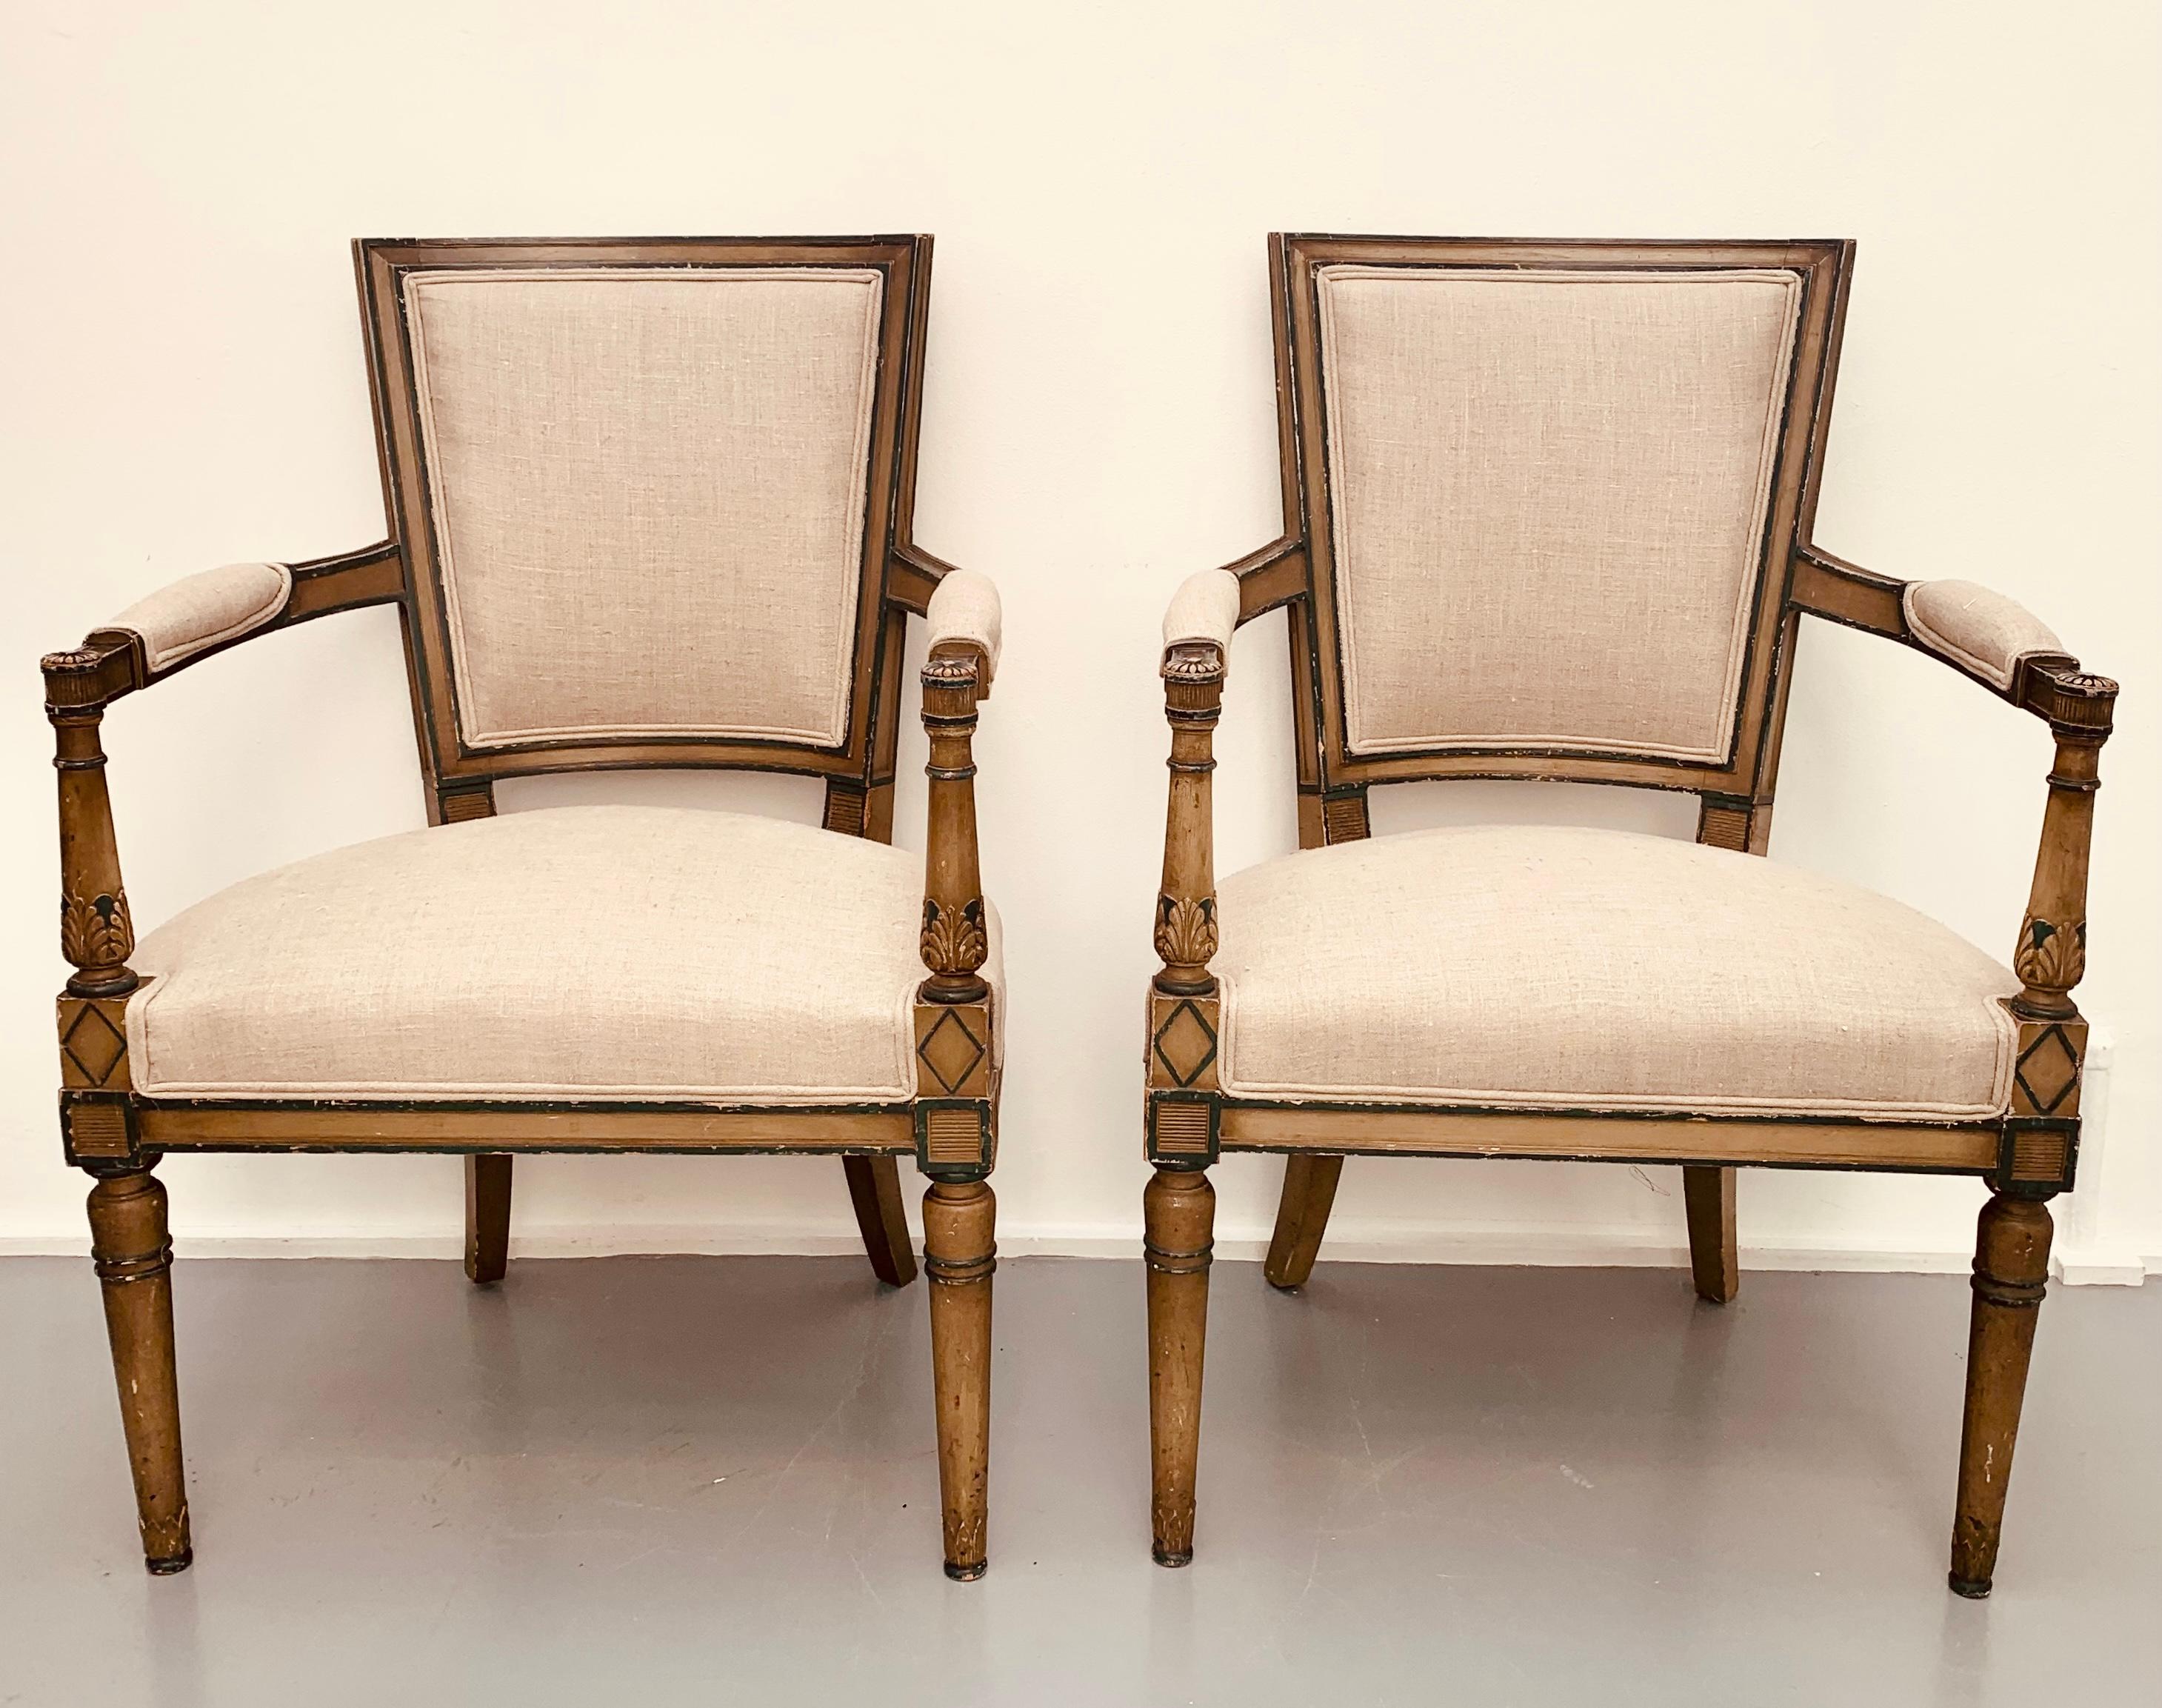 A wonderful pair of French late eighteenth century with their original patina dating from Directoire period circa 1790.  Recently reupholstered in a grey/beige linen fabric.

The frame is carved with geometric patterns and acanthus leaf carvings